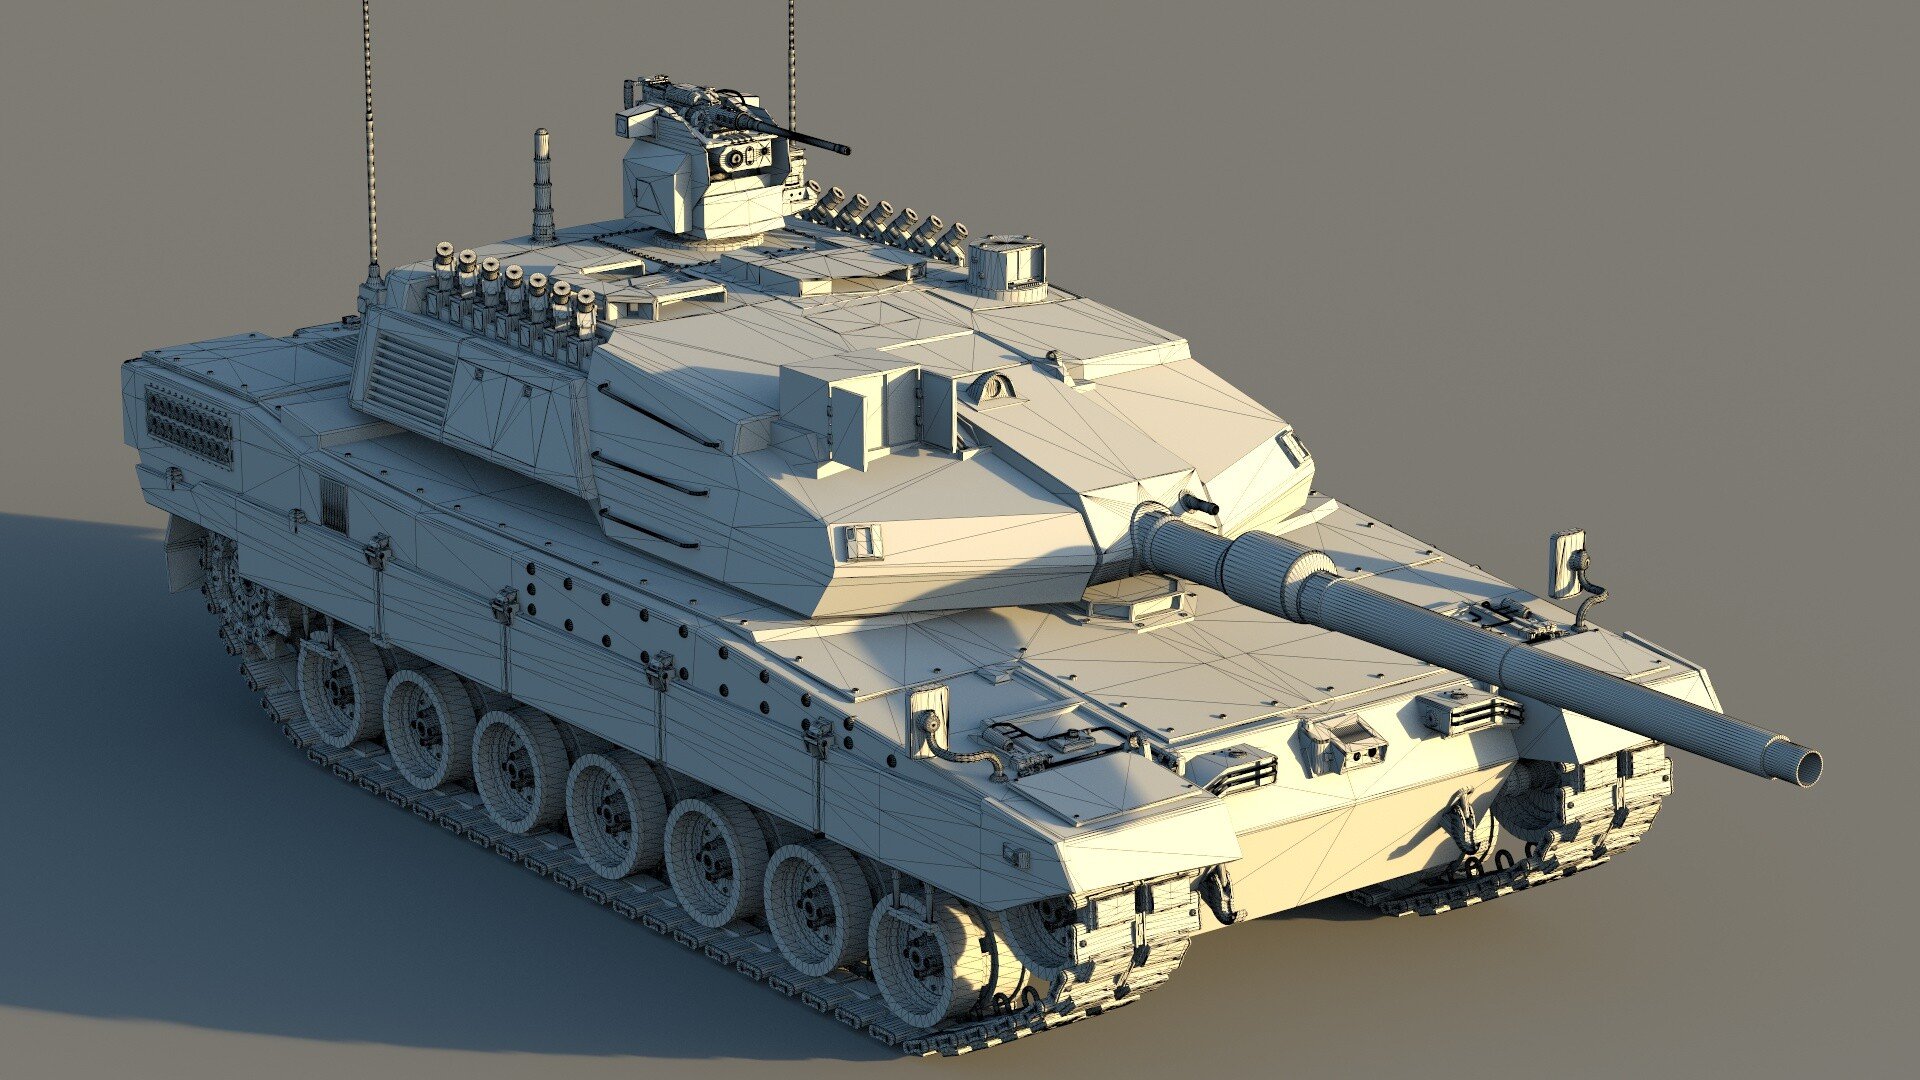 Fifine tank. Танк леопард 2022. Altay Leopard 2a4. Altay т1. БМП 1.